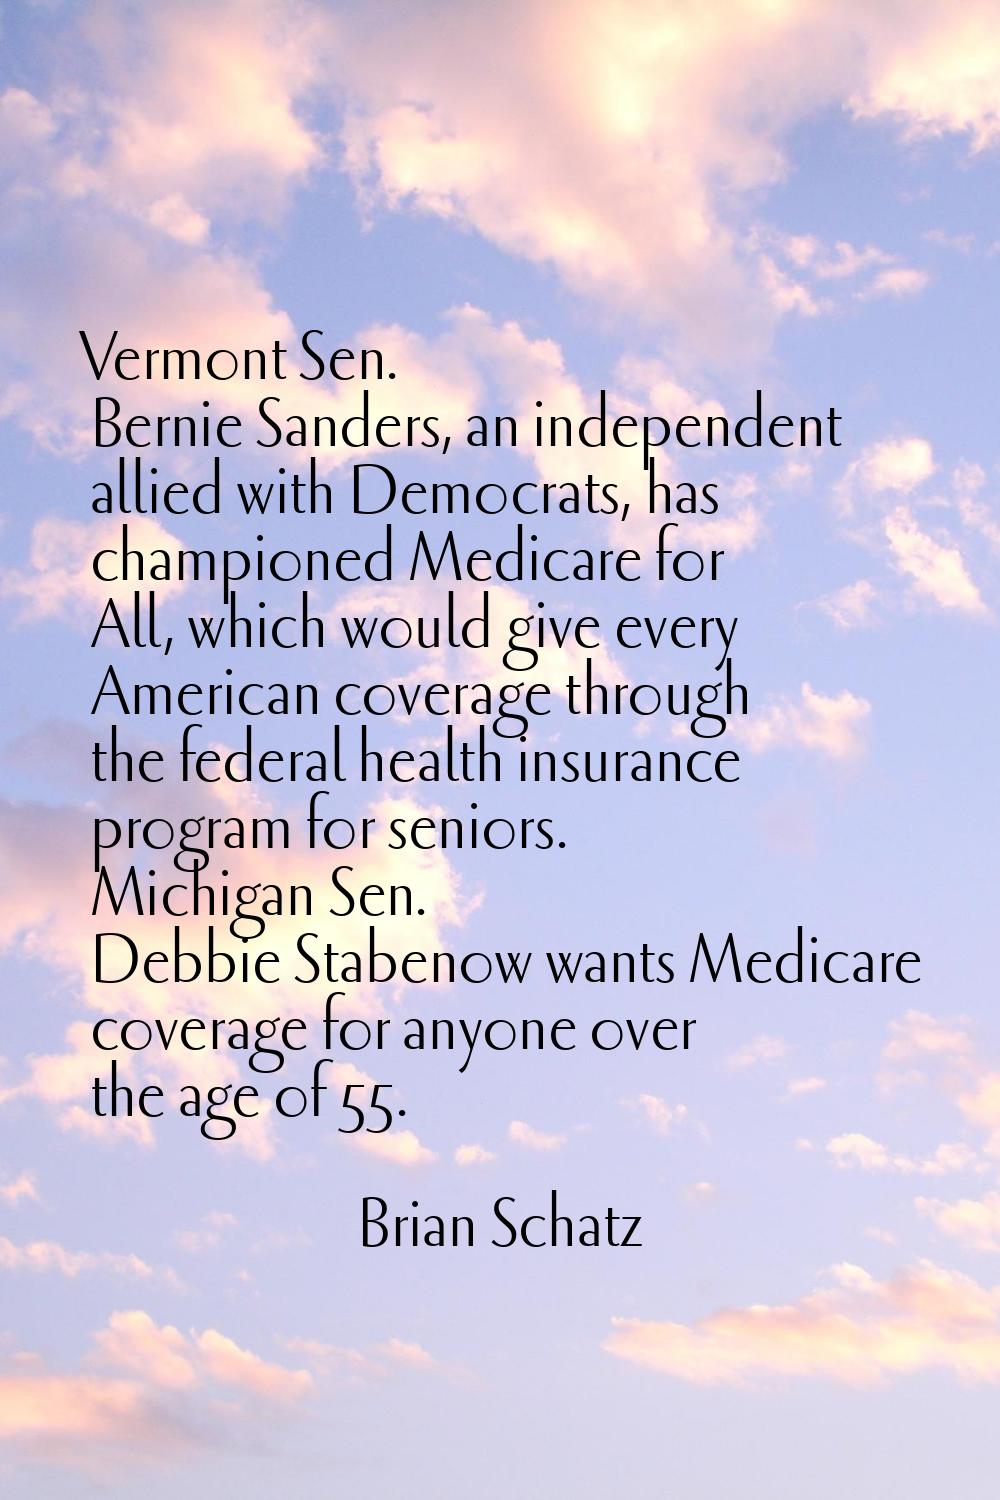 Vermont Sen. Bernie Sanders, an independent allied with Democrats, has championed Medicare for All,